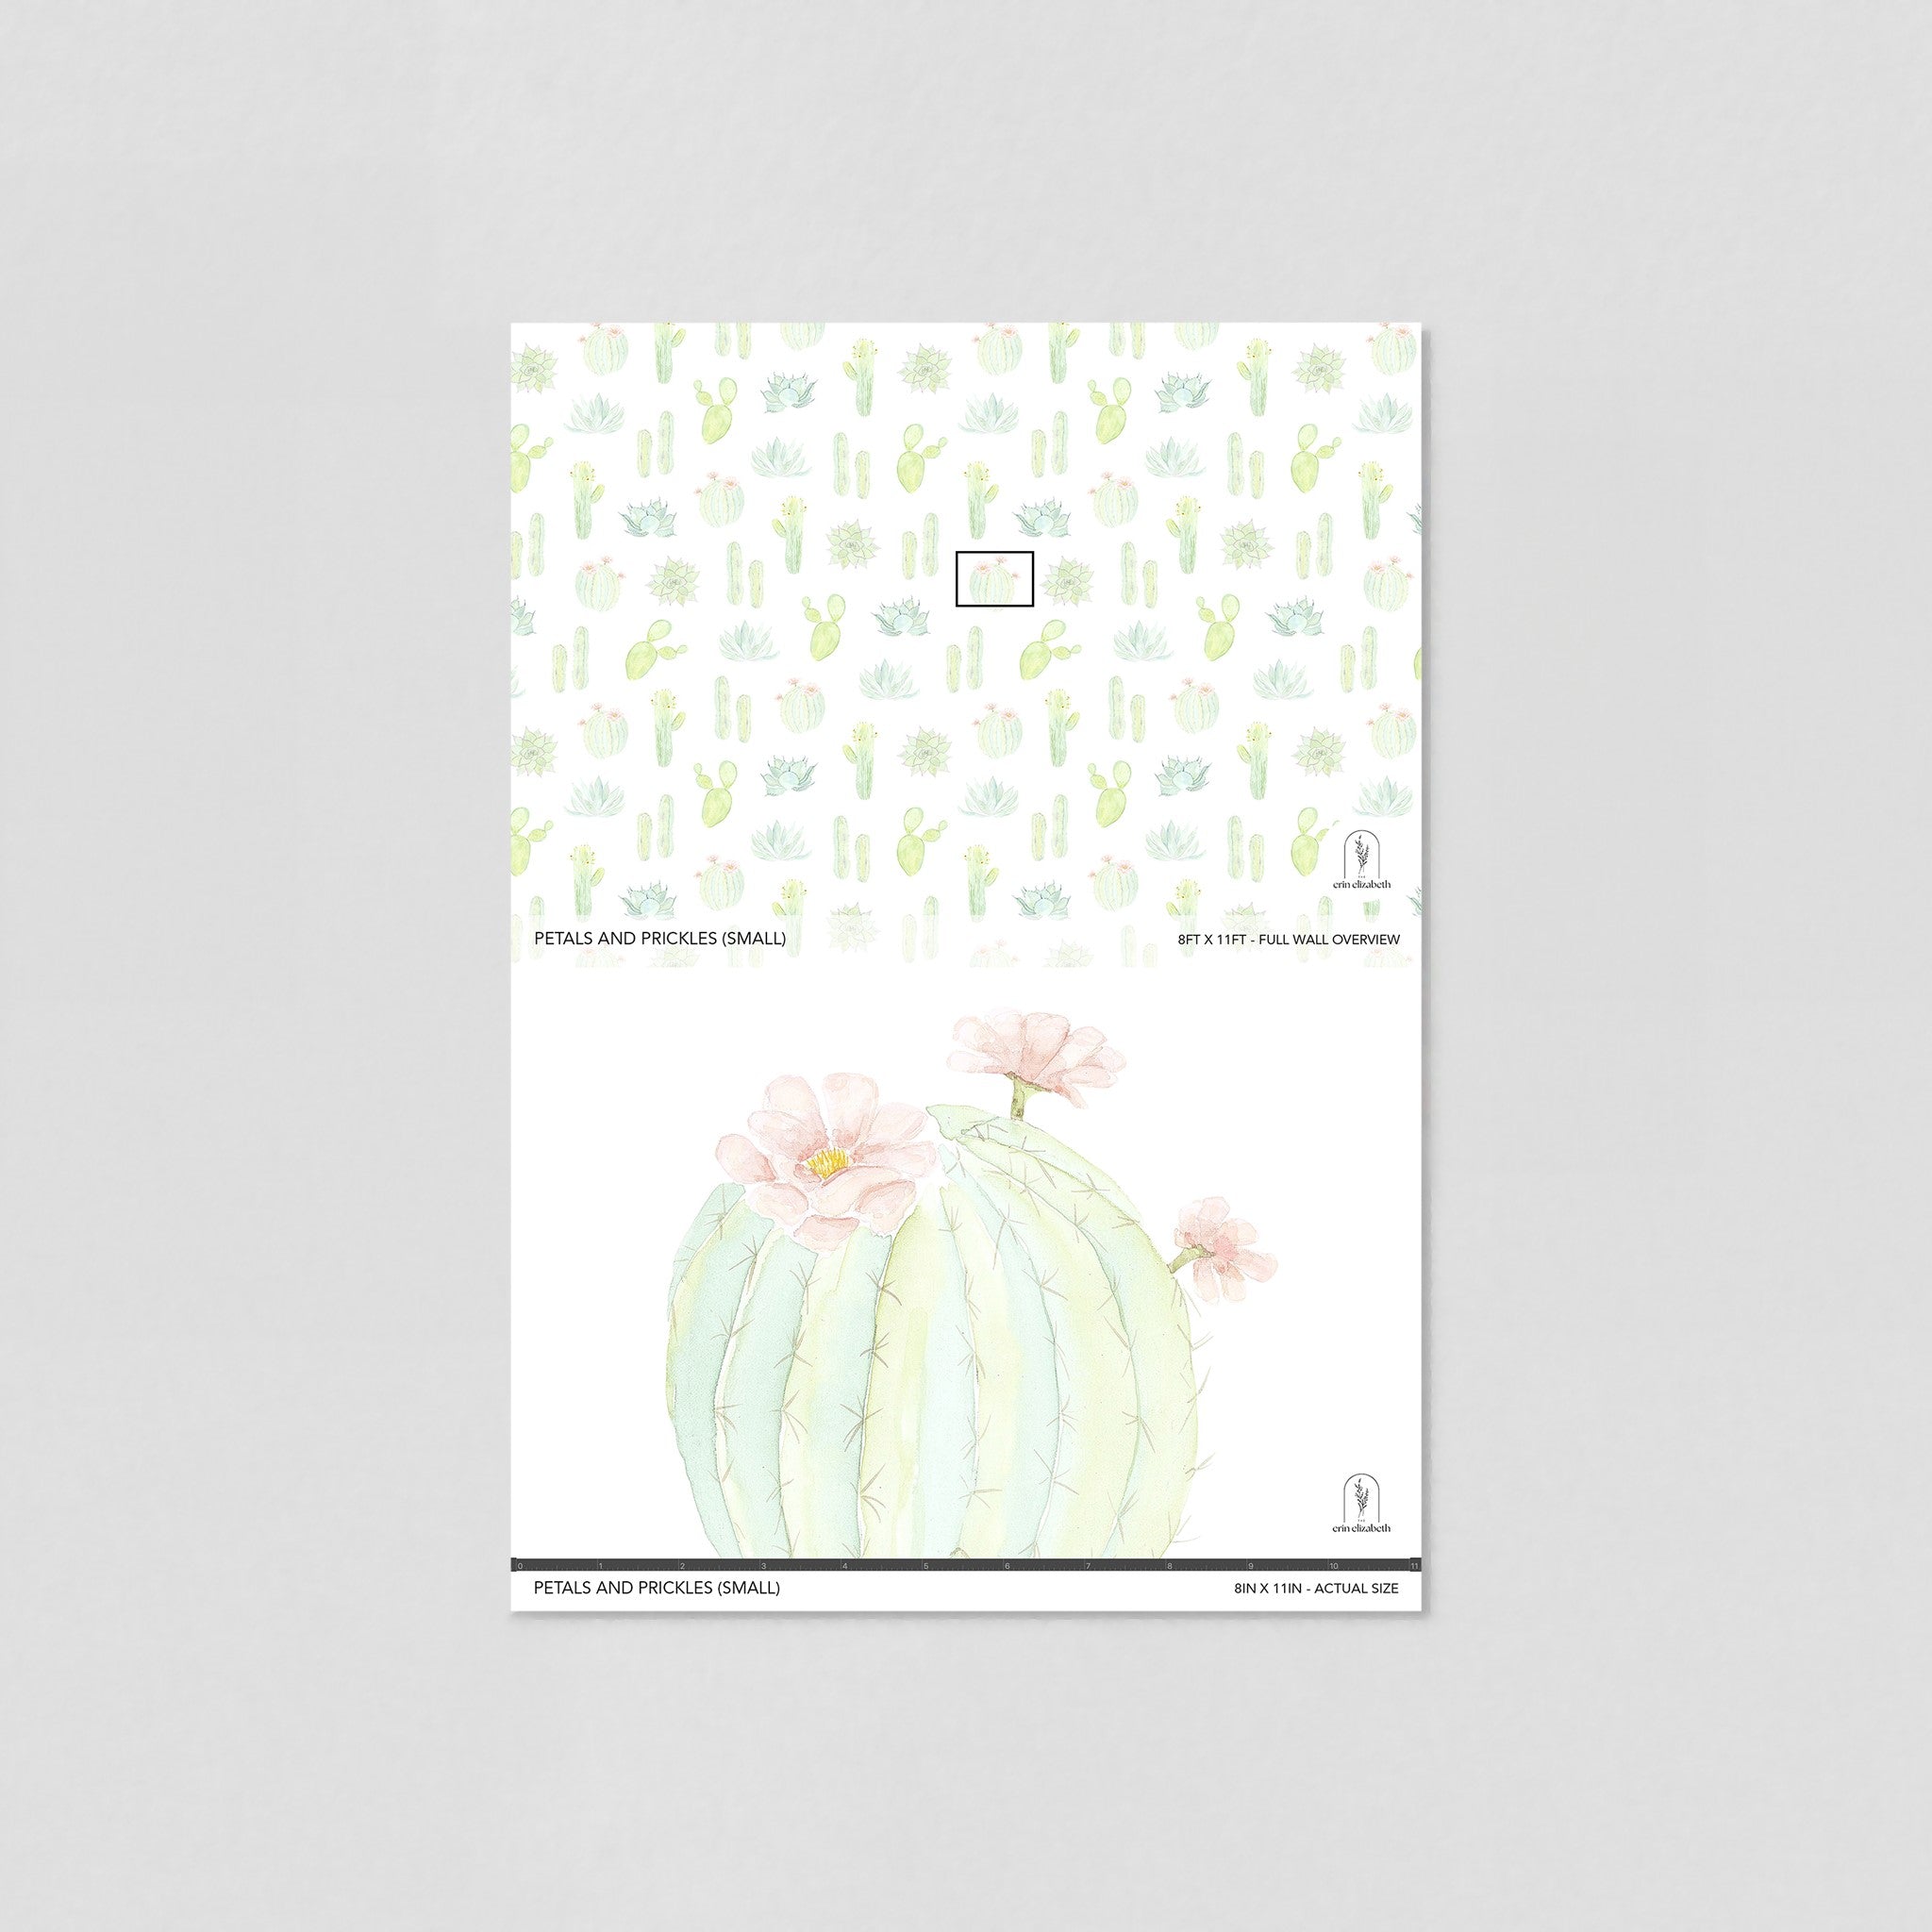 "Wall Blush's Petals and Prickles (Small) Wallpaper sample in a clean, simple setting, showcasing the design for a stylish room."